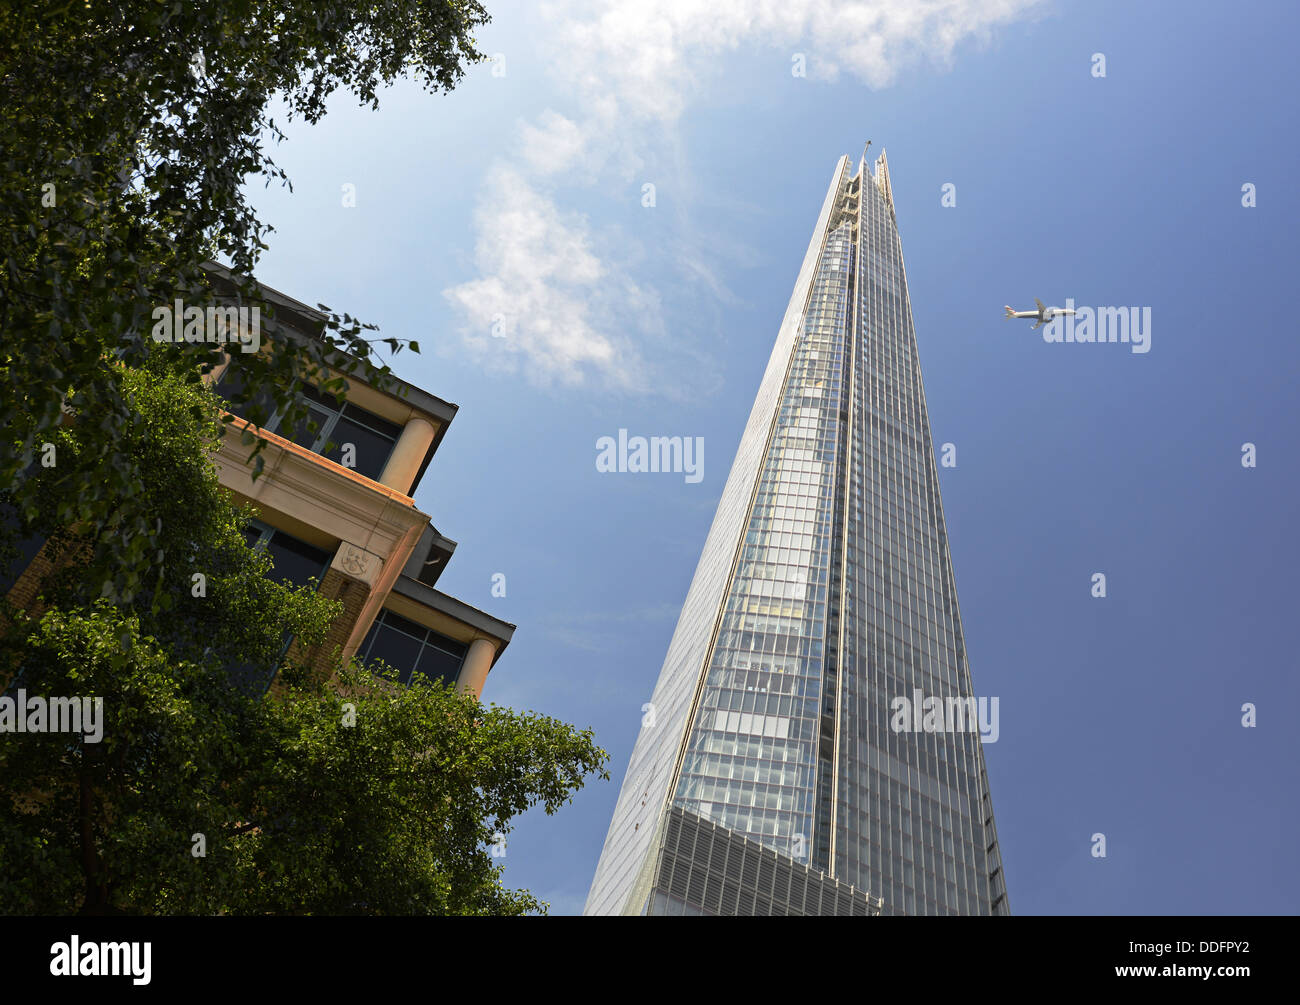 The Shard skyscraper building and airplane, Southwark, London, England, UK Stock Photo